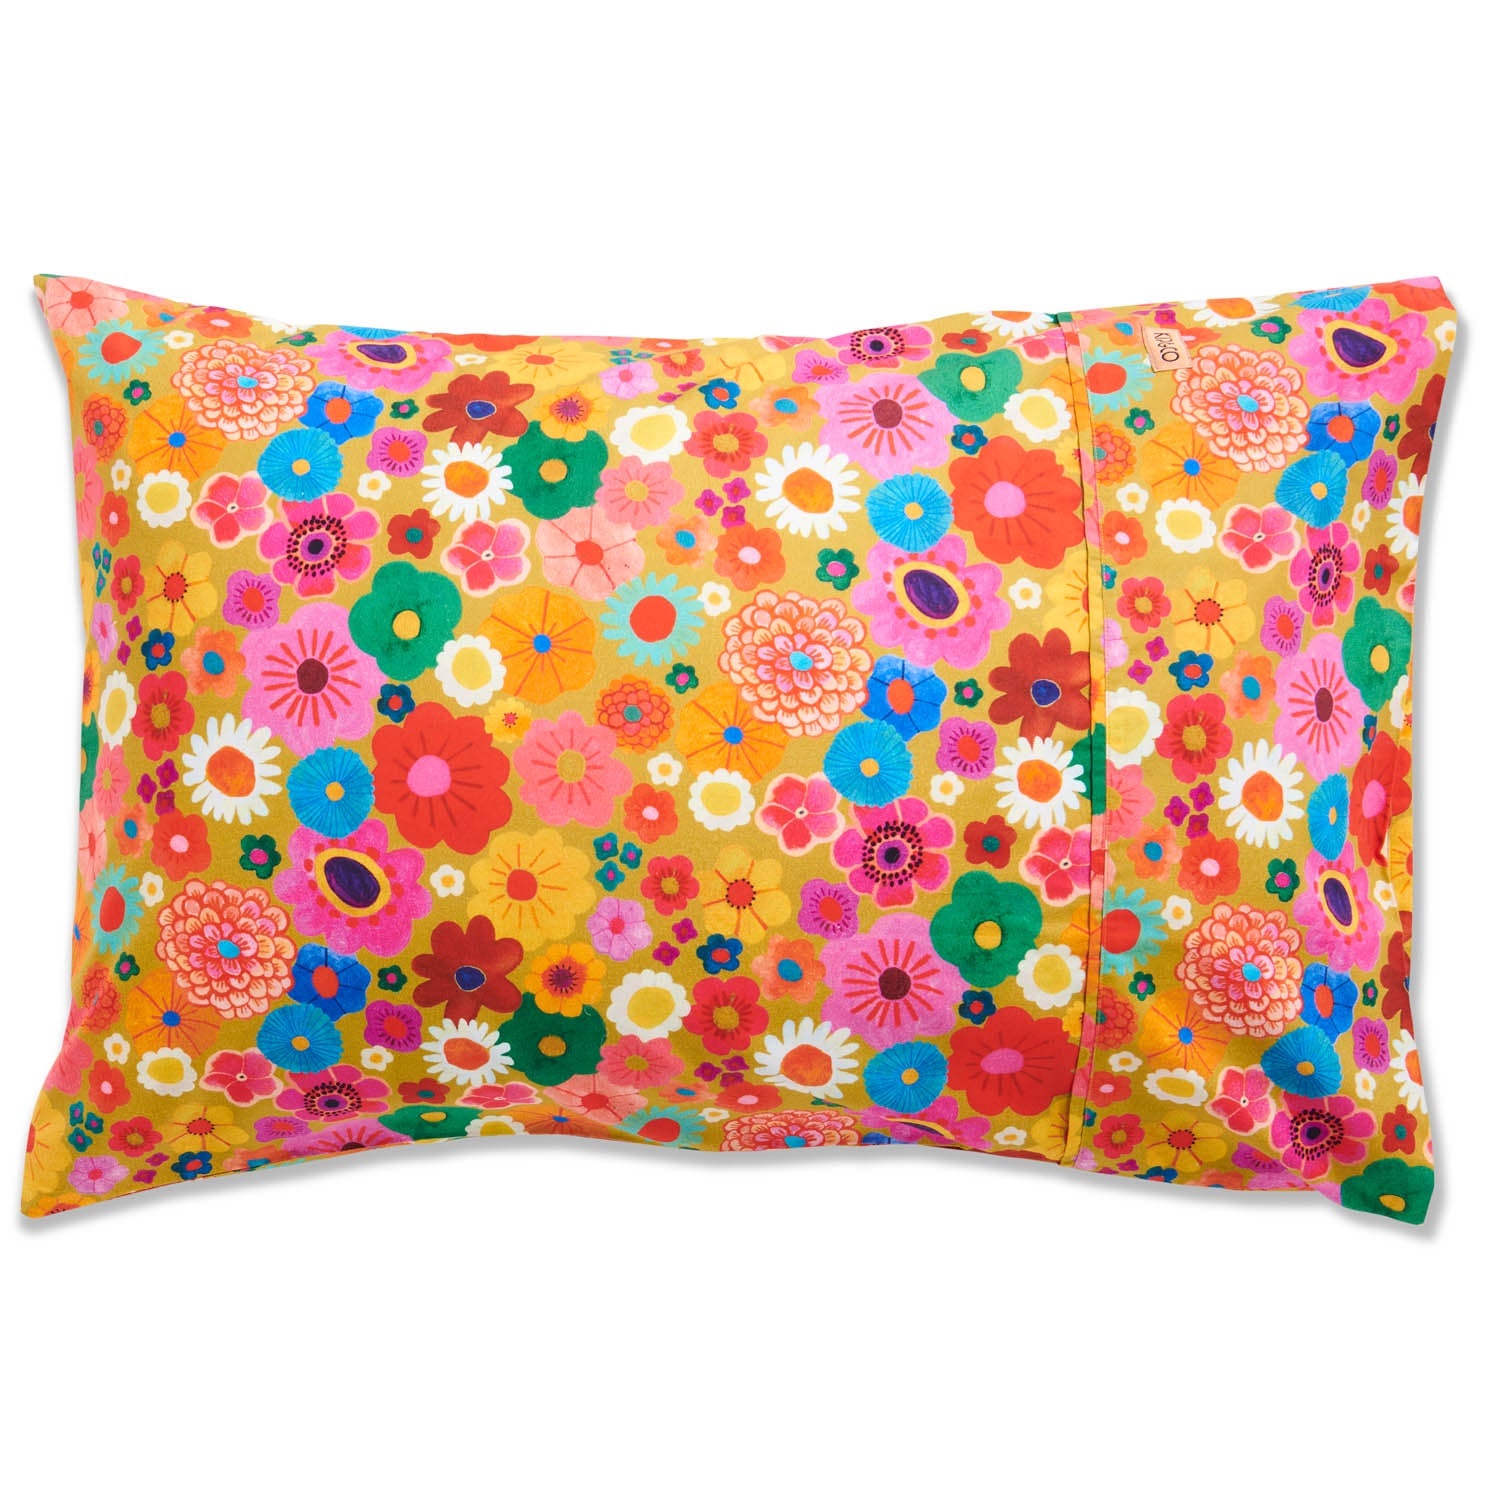 Organic Cotton Pillowcases - Flower Bed